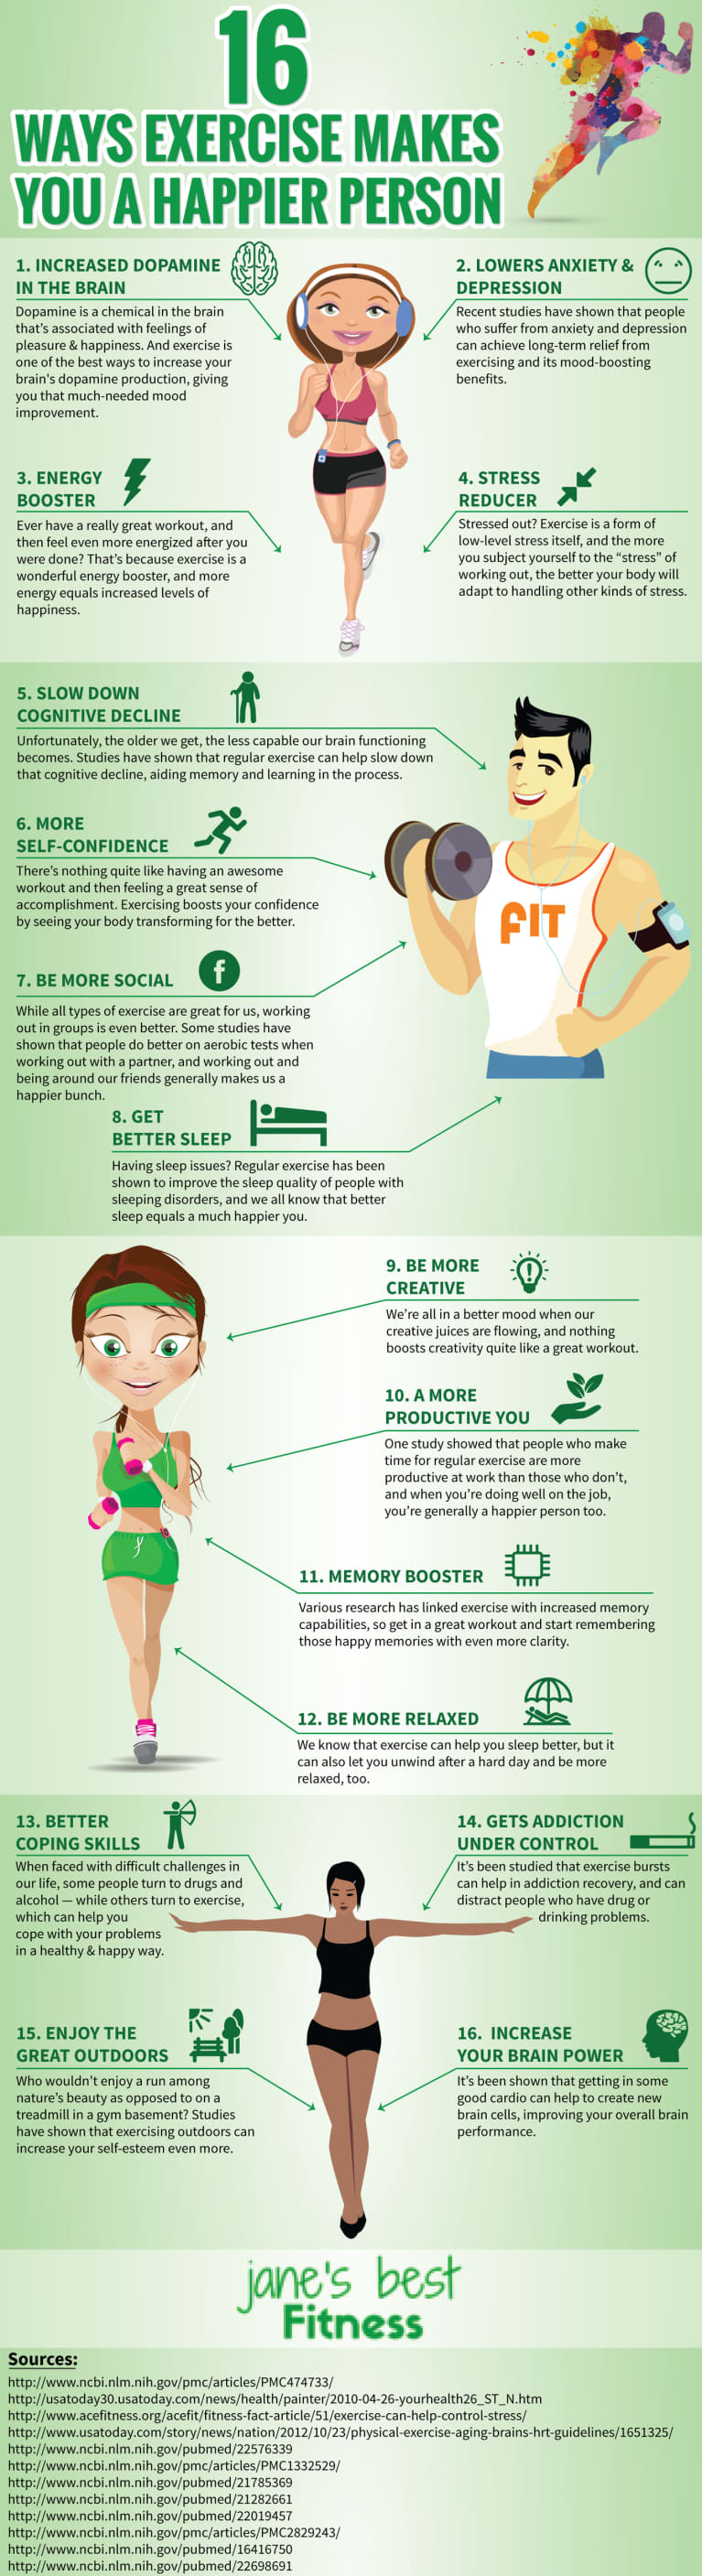 16 Ways Exercise Makes You Happier (Infographic)